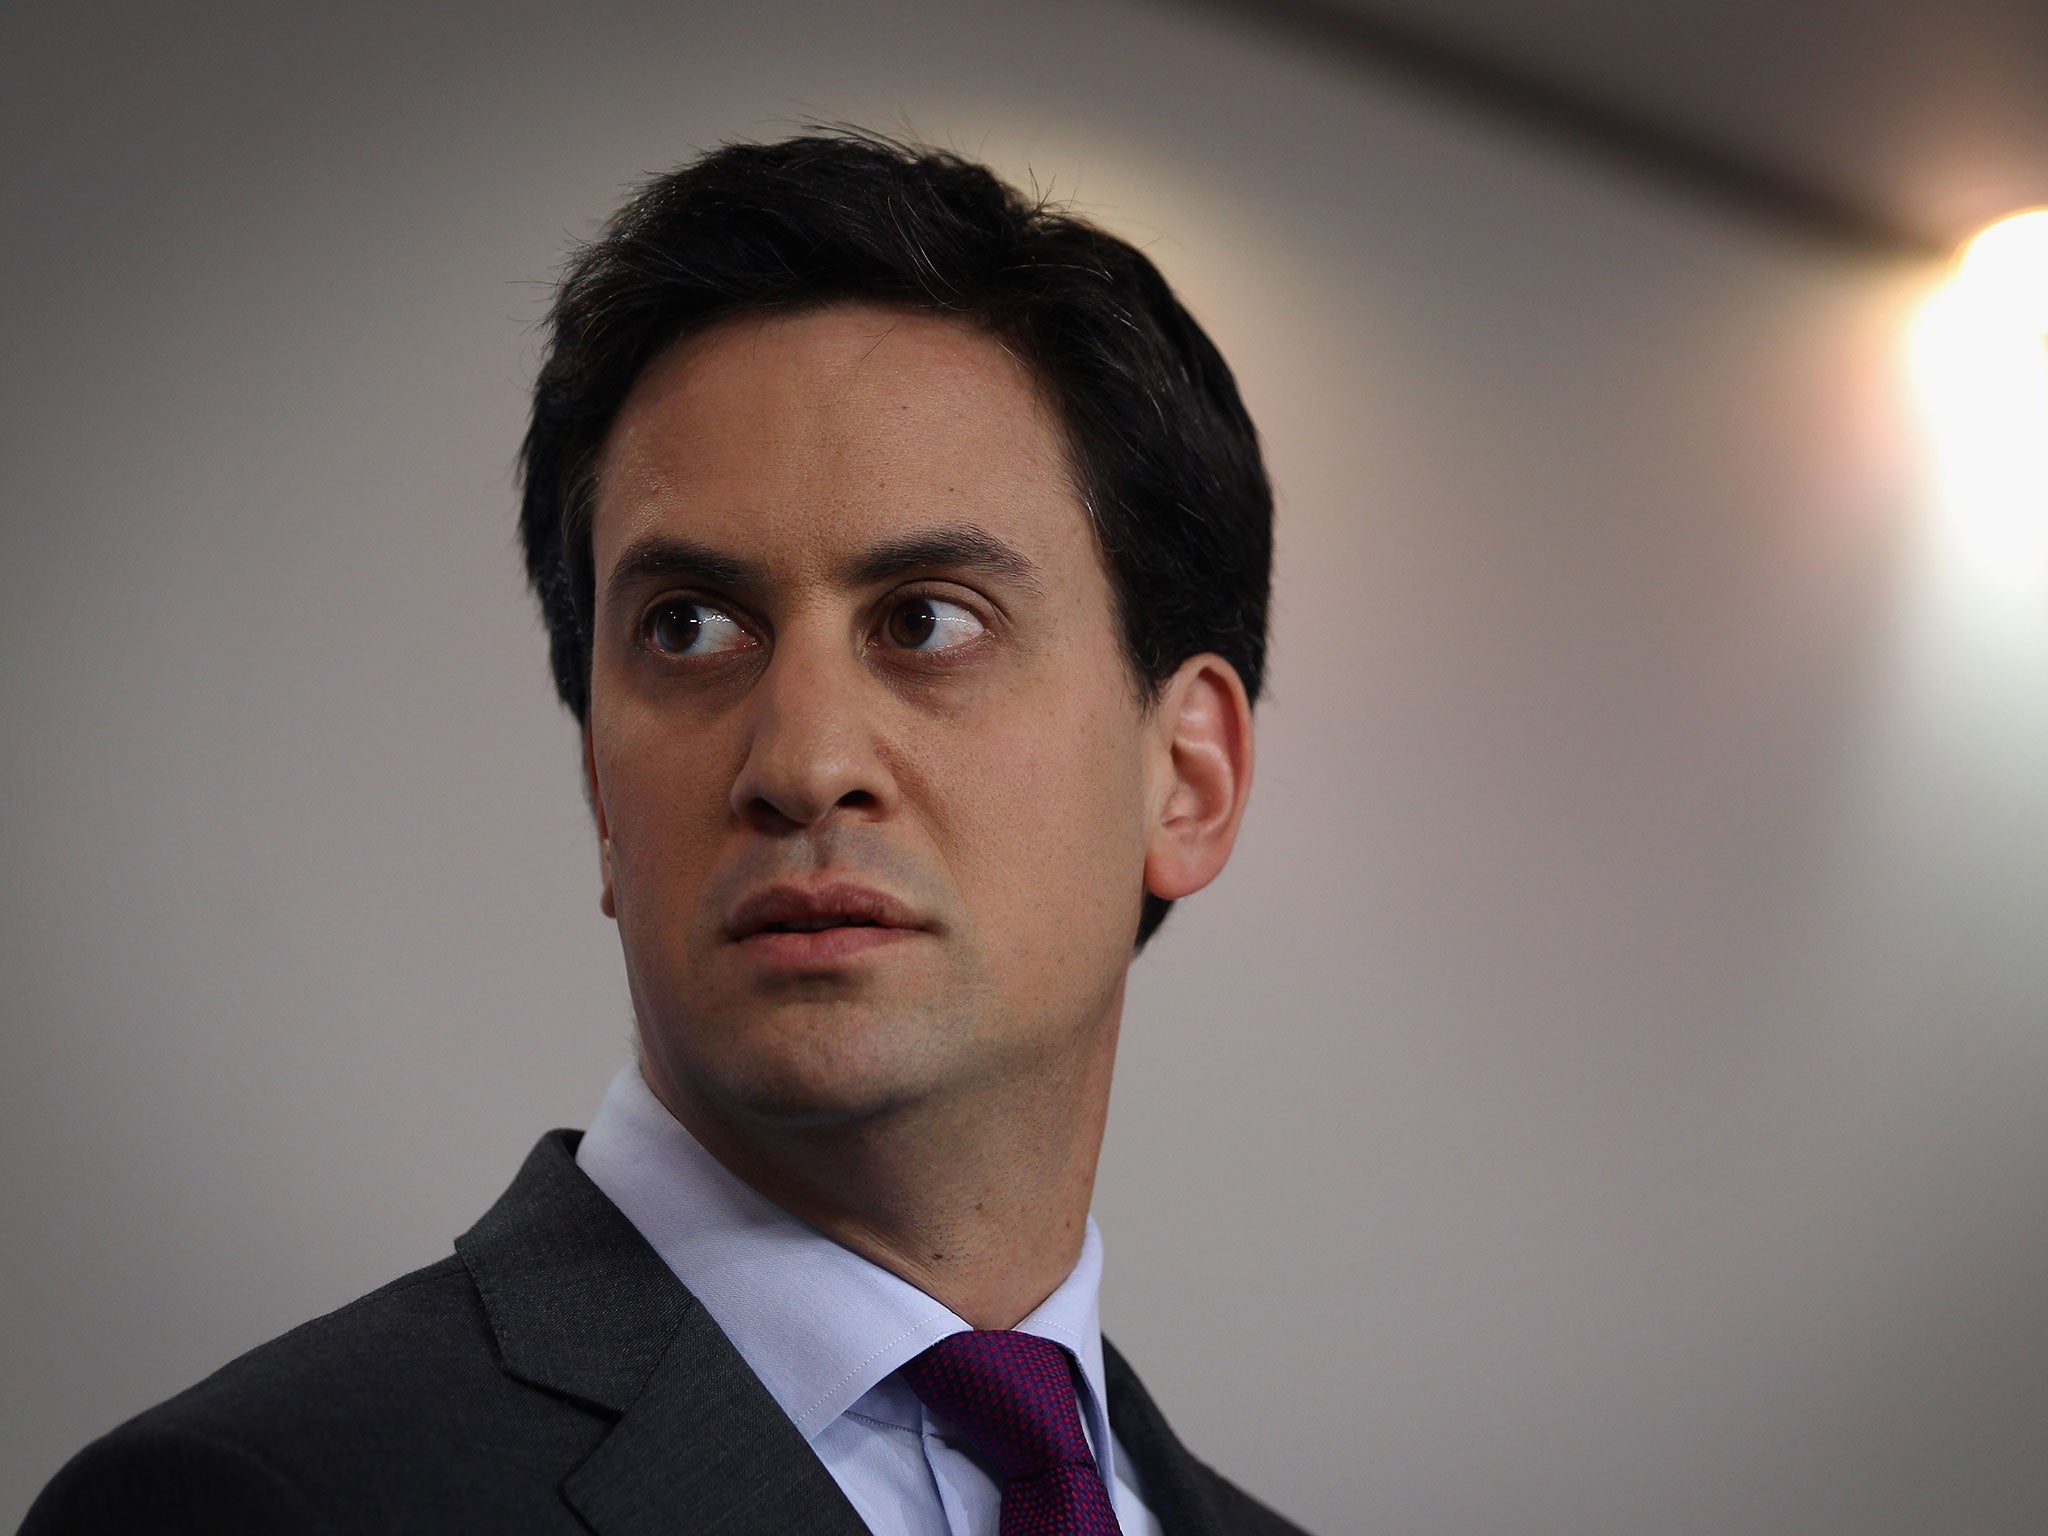 Ed Miliband was quoted as saying four fifths of new private sector posts since 2010 were in the capital